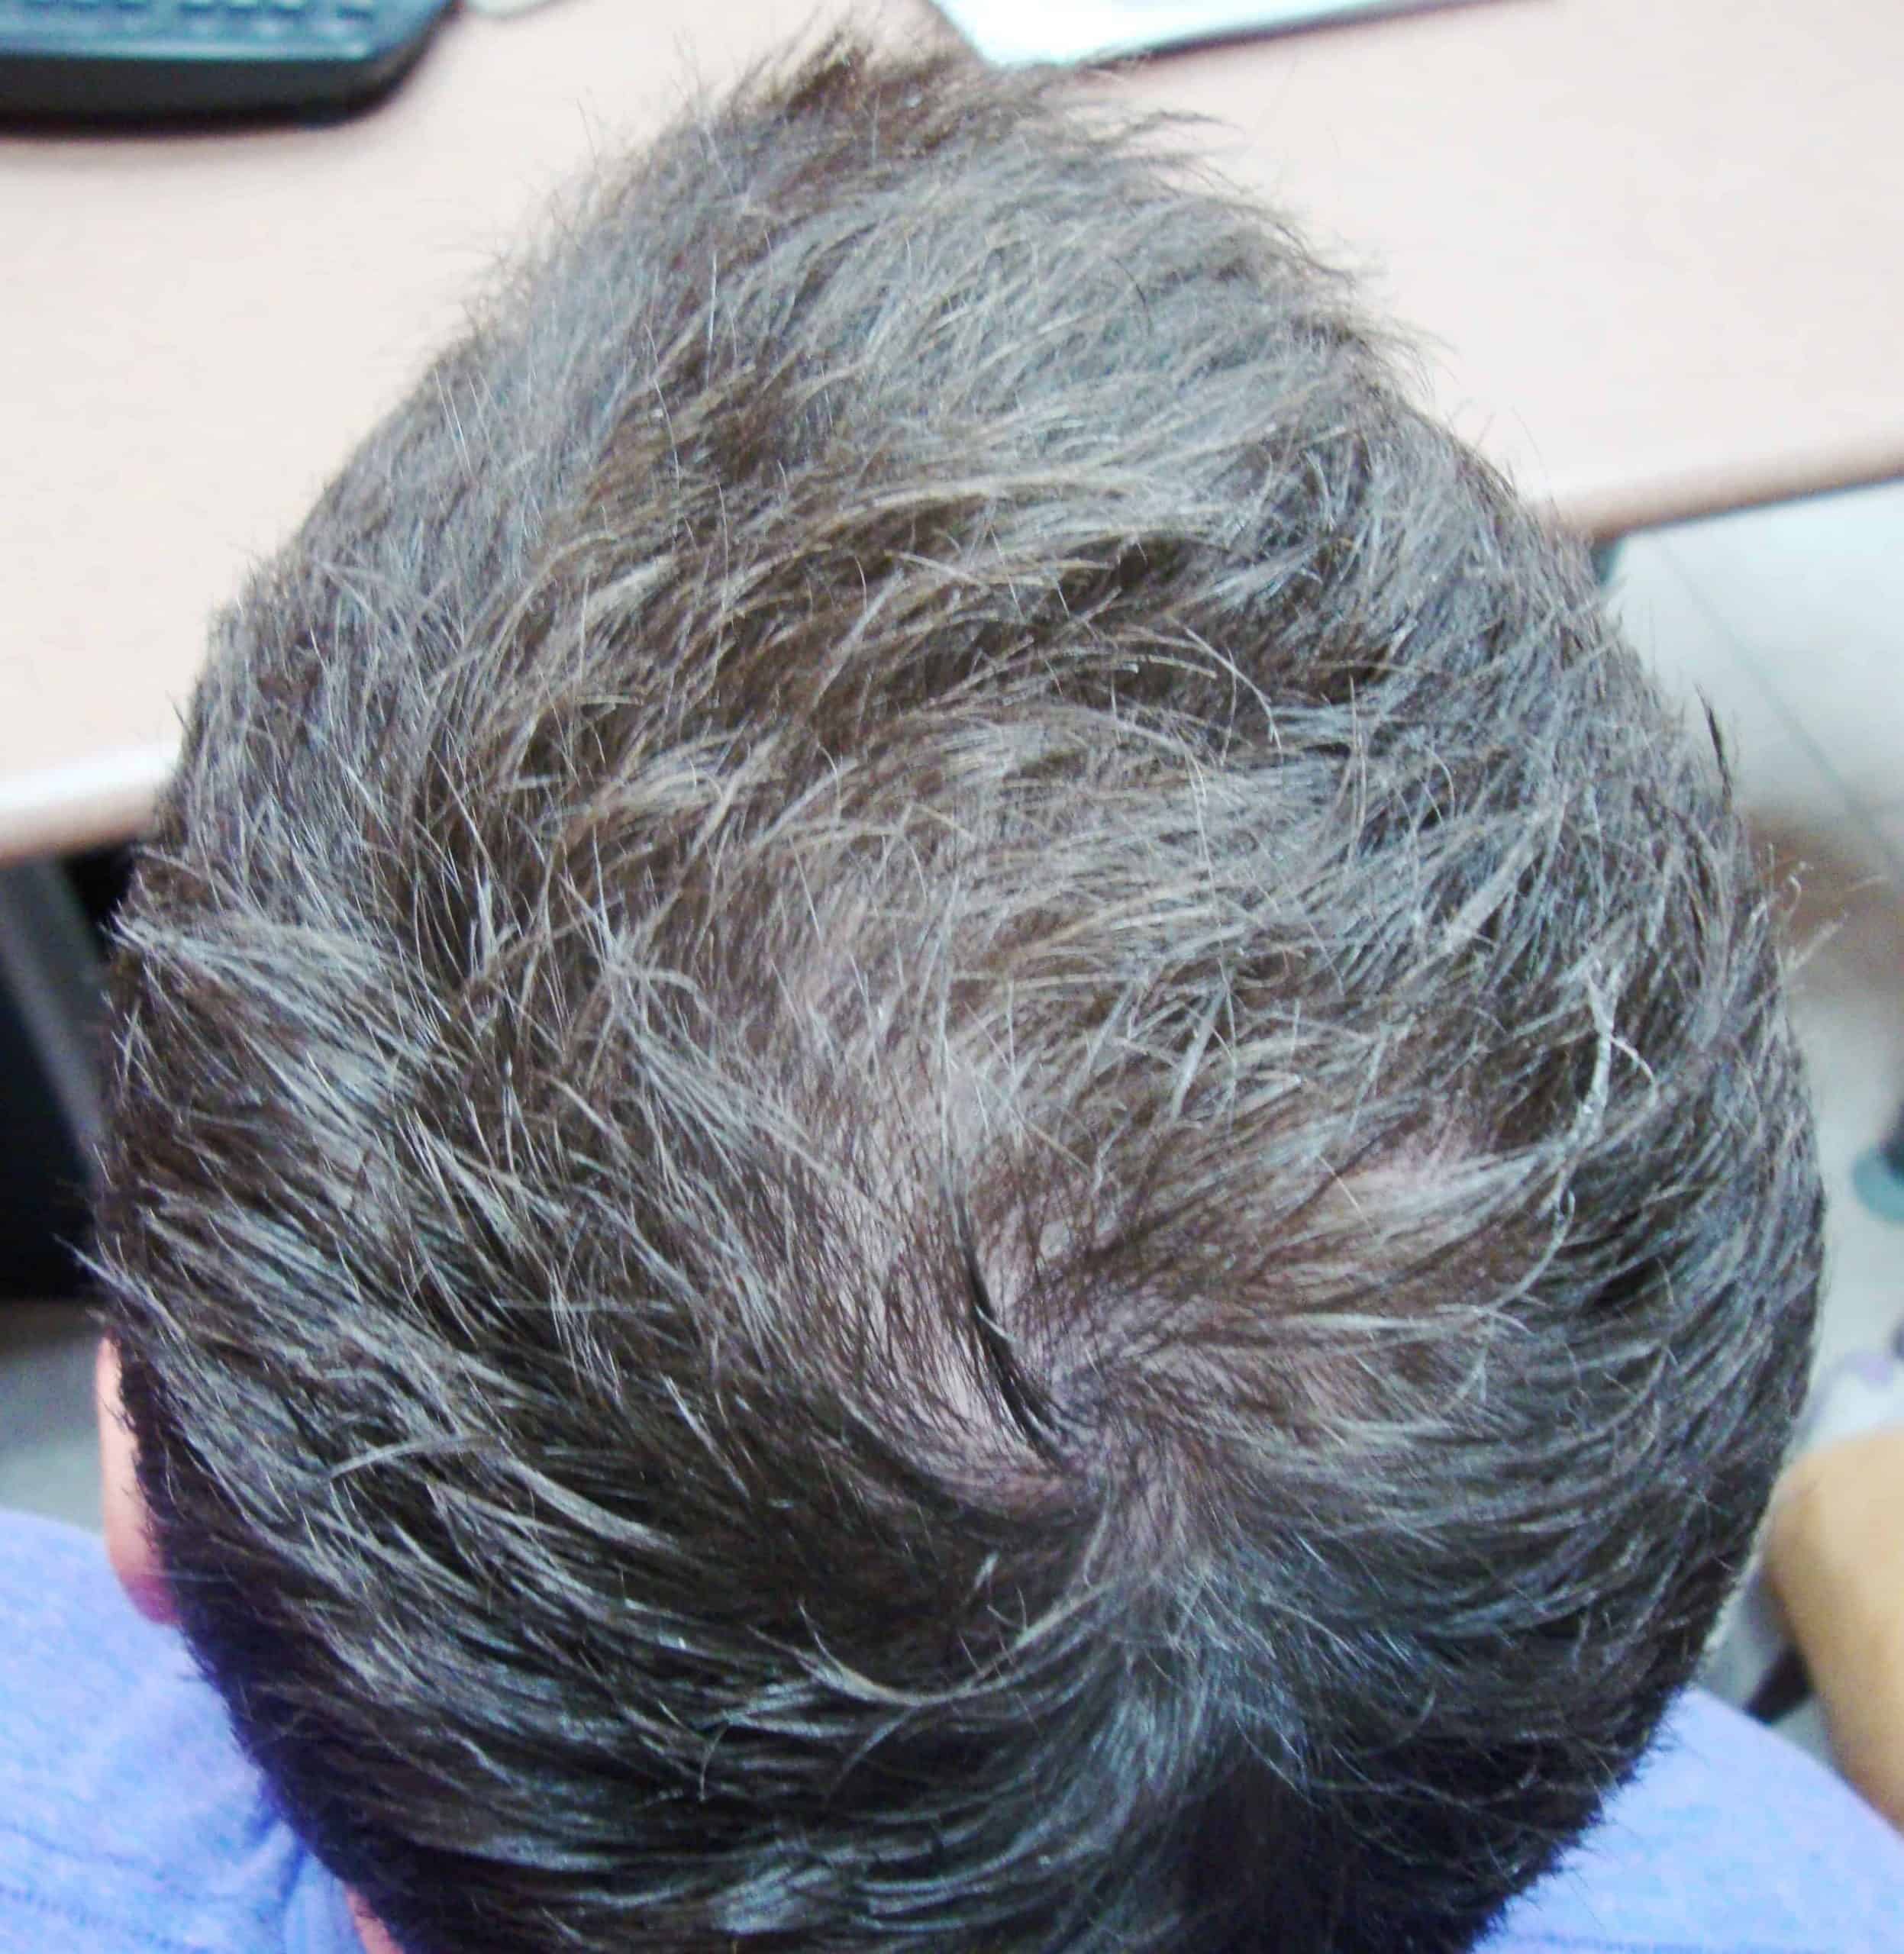 Ryan 3 Months of laser hair therapy Treatment